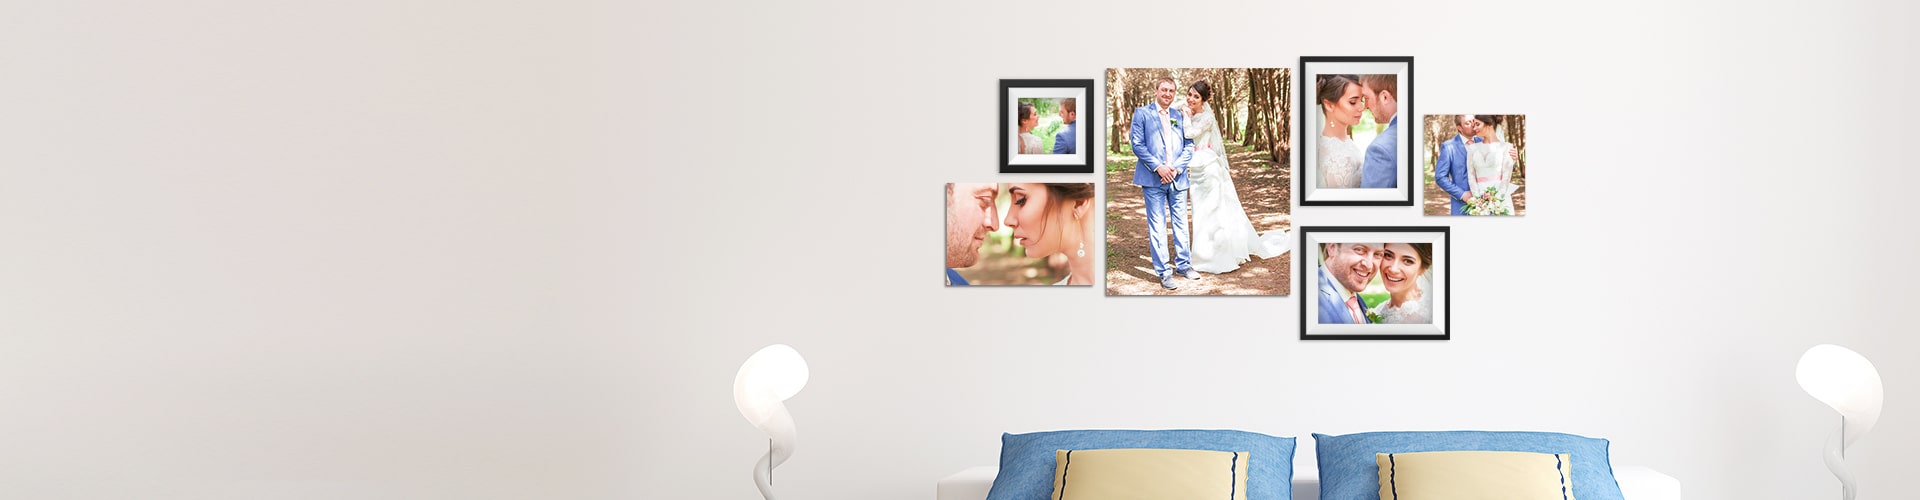 Personalized Photo Gifts & Custom Photo Gifts